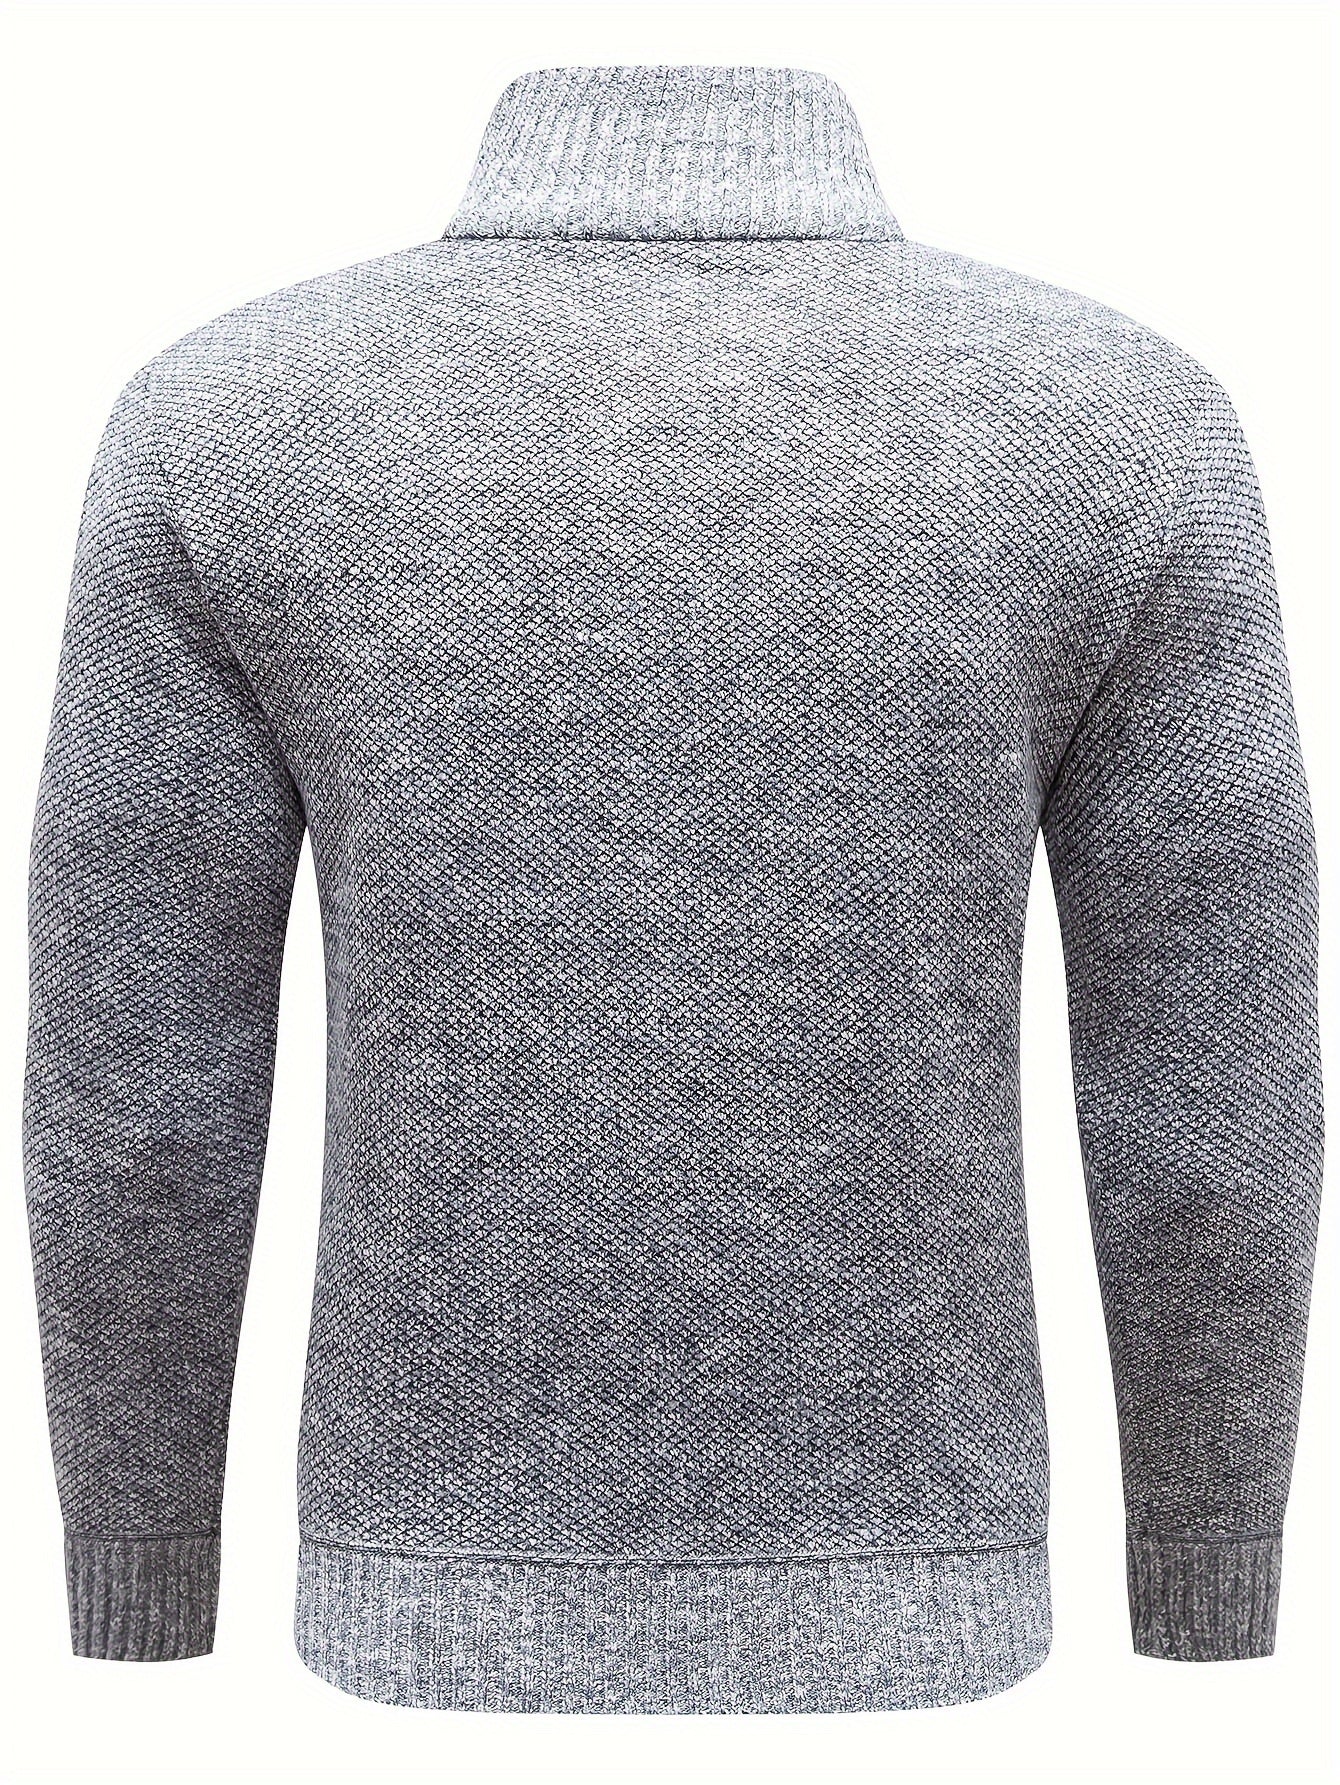 Chic Knit Sweater, Men's Casual Lapel Slightly Stretch V-Neck Pullover Sweater For Men Winter Fall